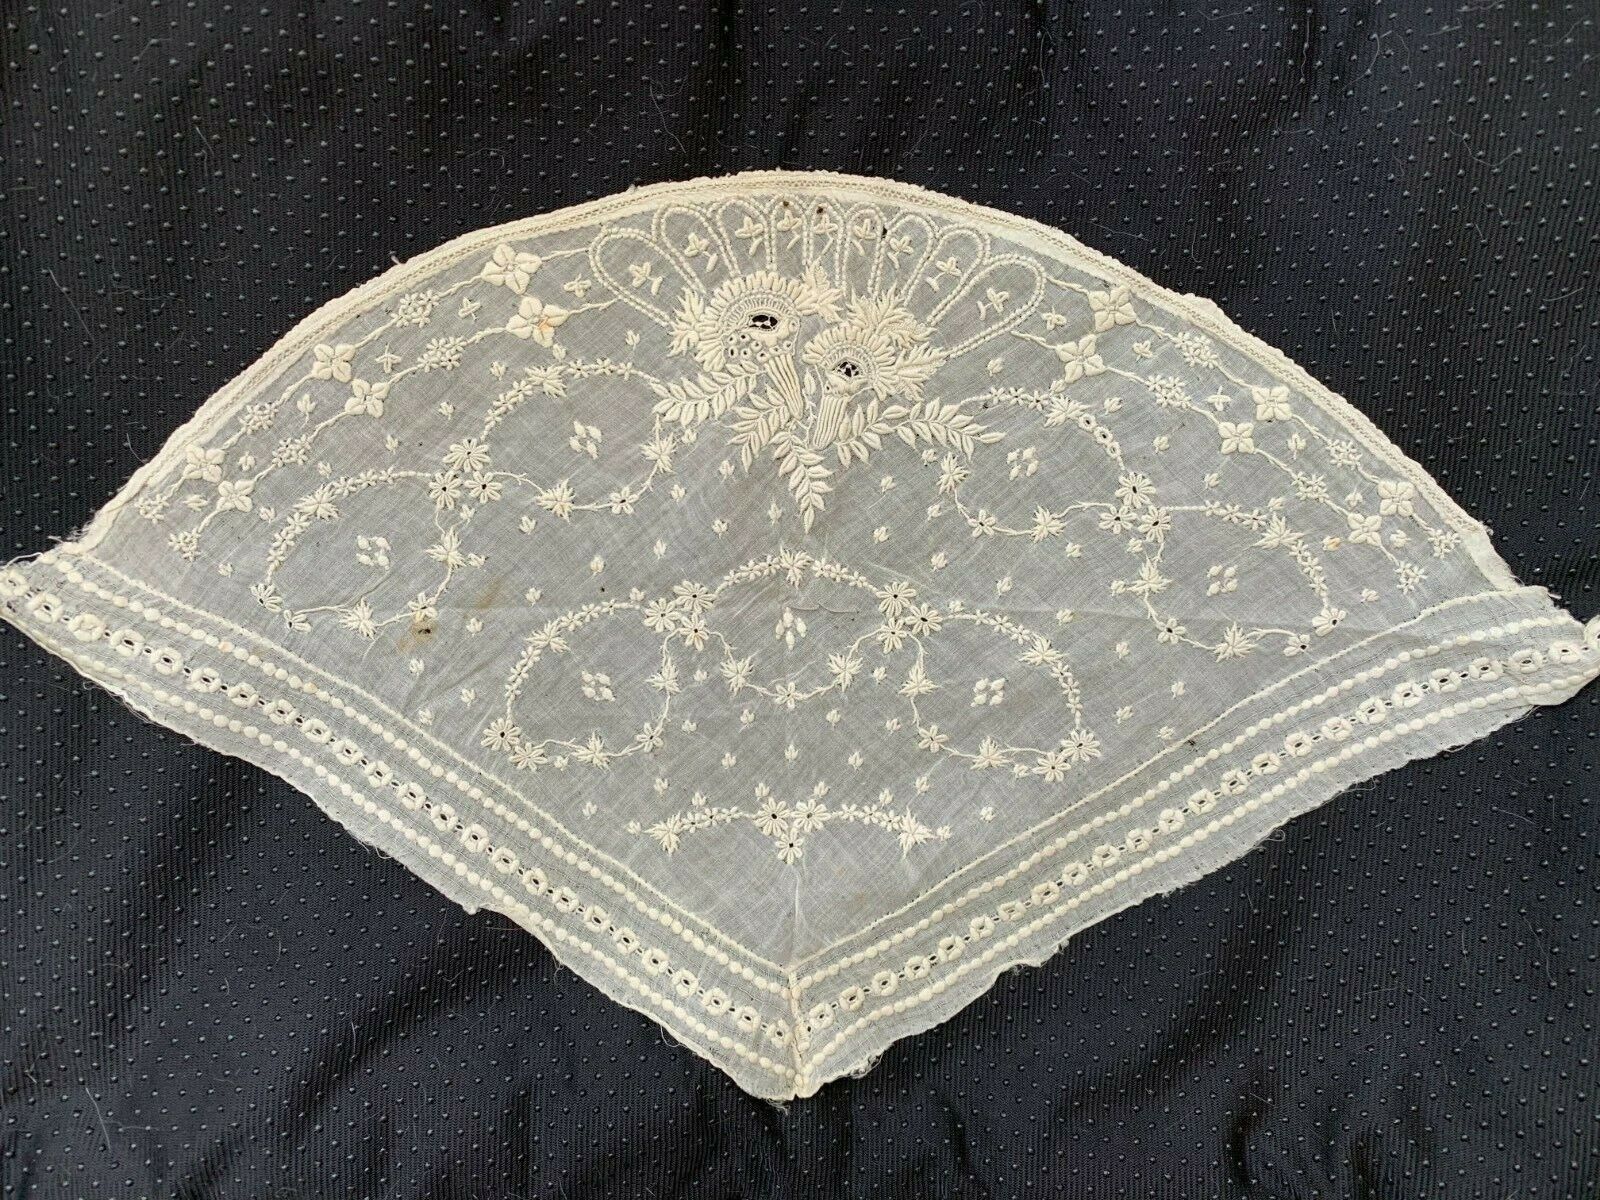 Gorgeous French 1860s Lace Bonnet - Hand embroidery on linon - Floral design